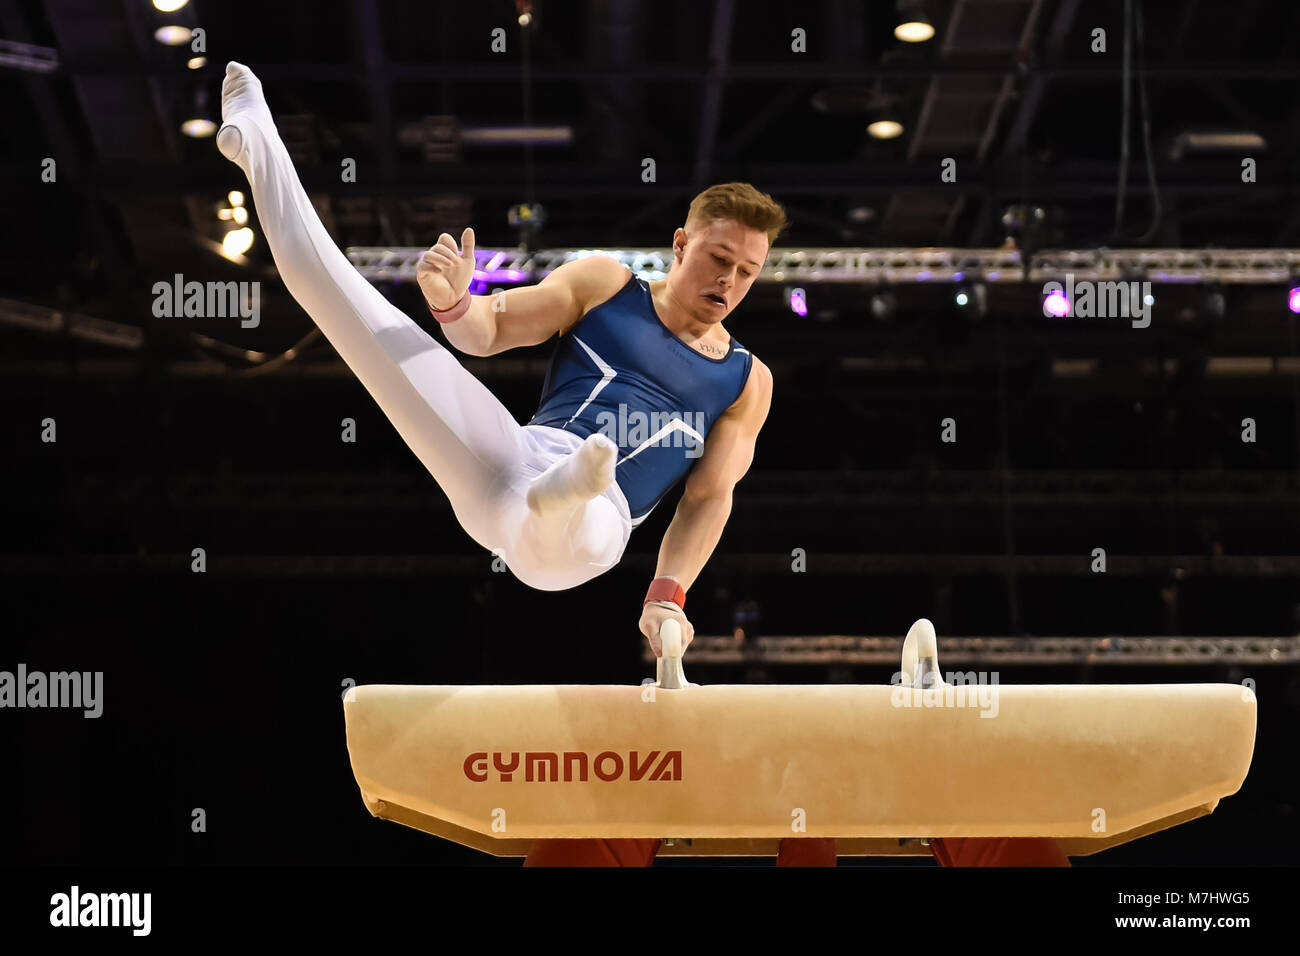 Liverpool, UK. 10th March, 2018. Bring Bevan of South Essex Gymnastics competes on the Pommel Horse during Men's All-Round of the 2018 Gymnastics British Championships at Echo Arena on Saturday, 10 March 2018. LIVERPOOL ENGLAND. Credit: Taka G Wu Credit: Taka Wu/Alamy Live News Stock Photo